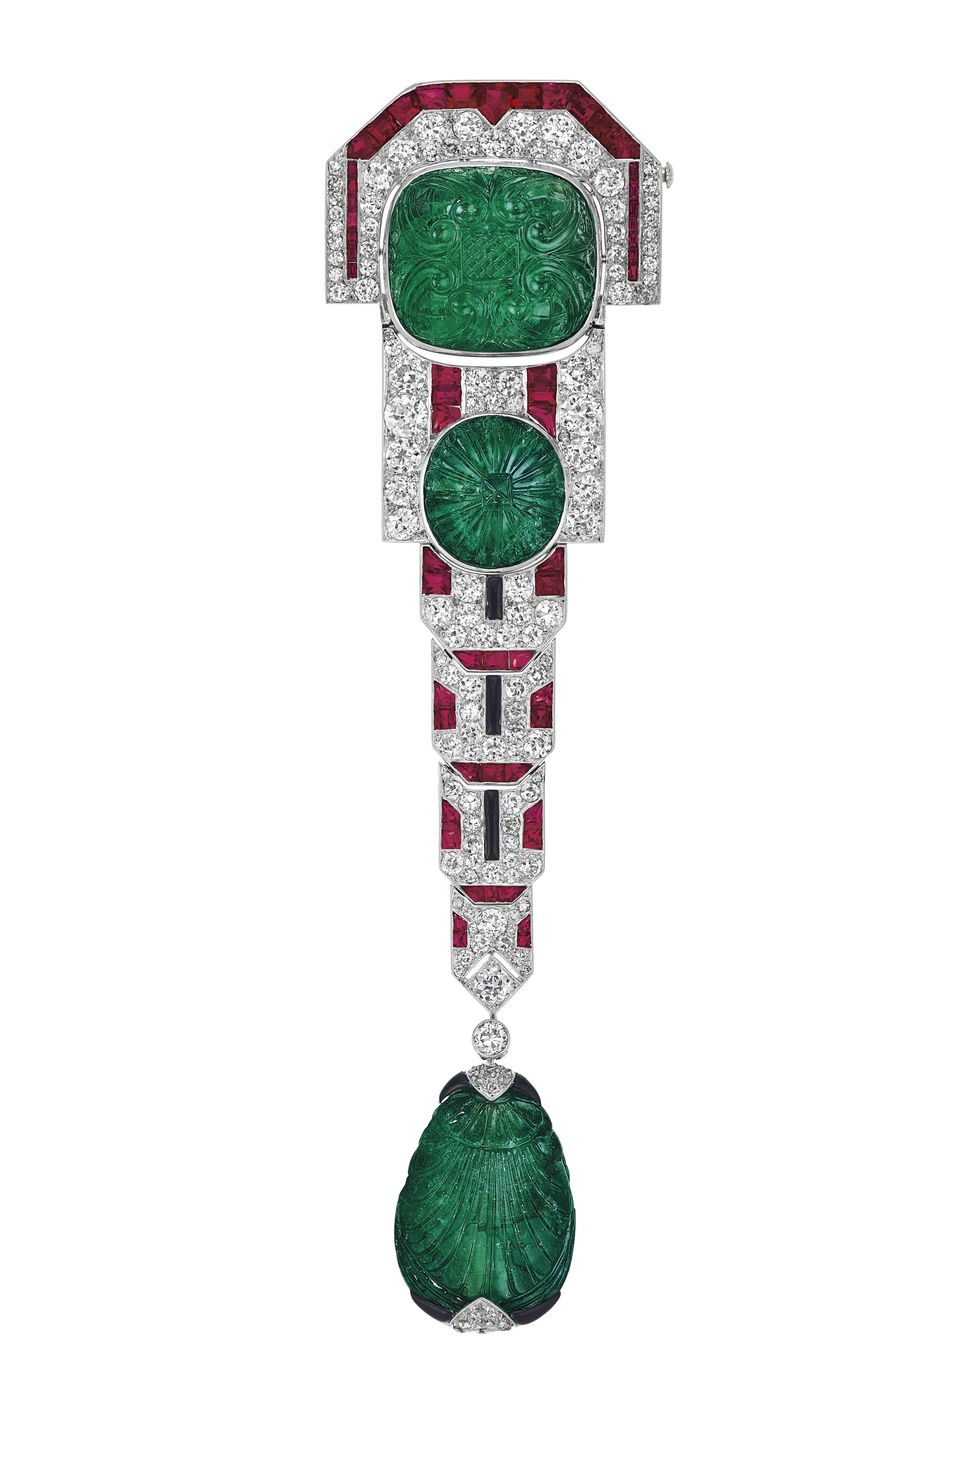 The History Of Art Deco Design In Jewelry And Why The Style Sells So Well  At Auction